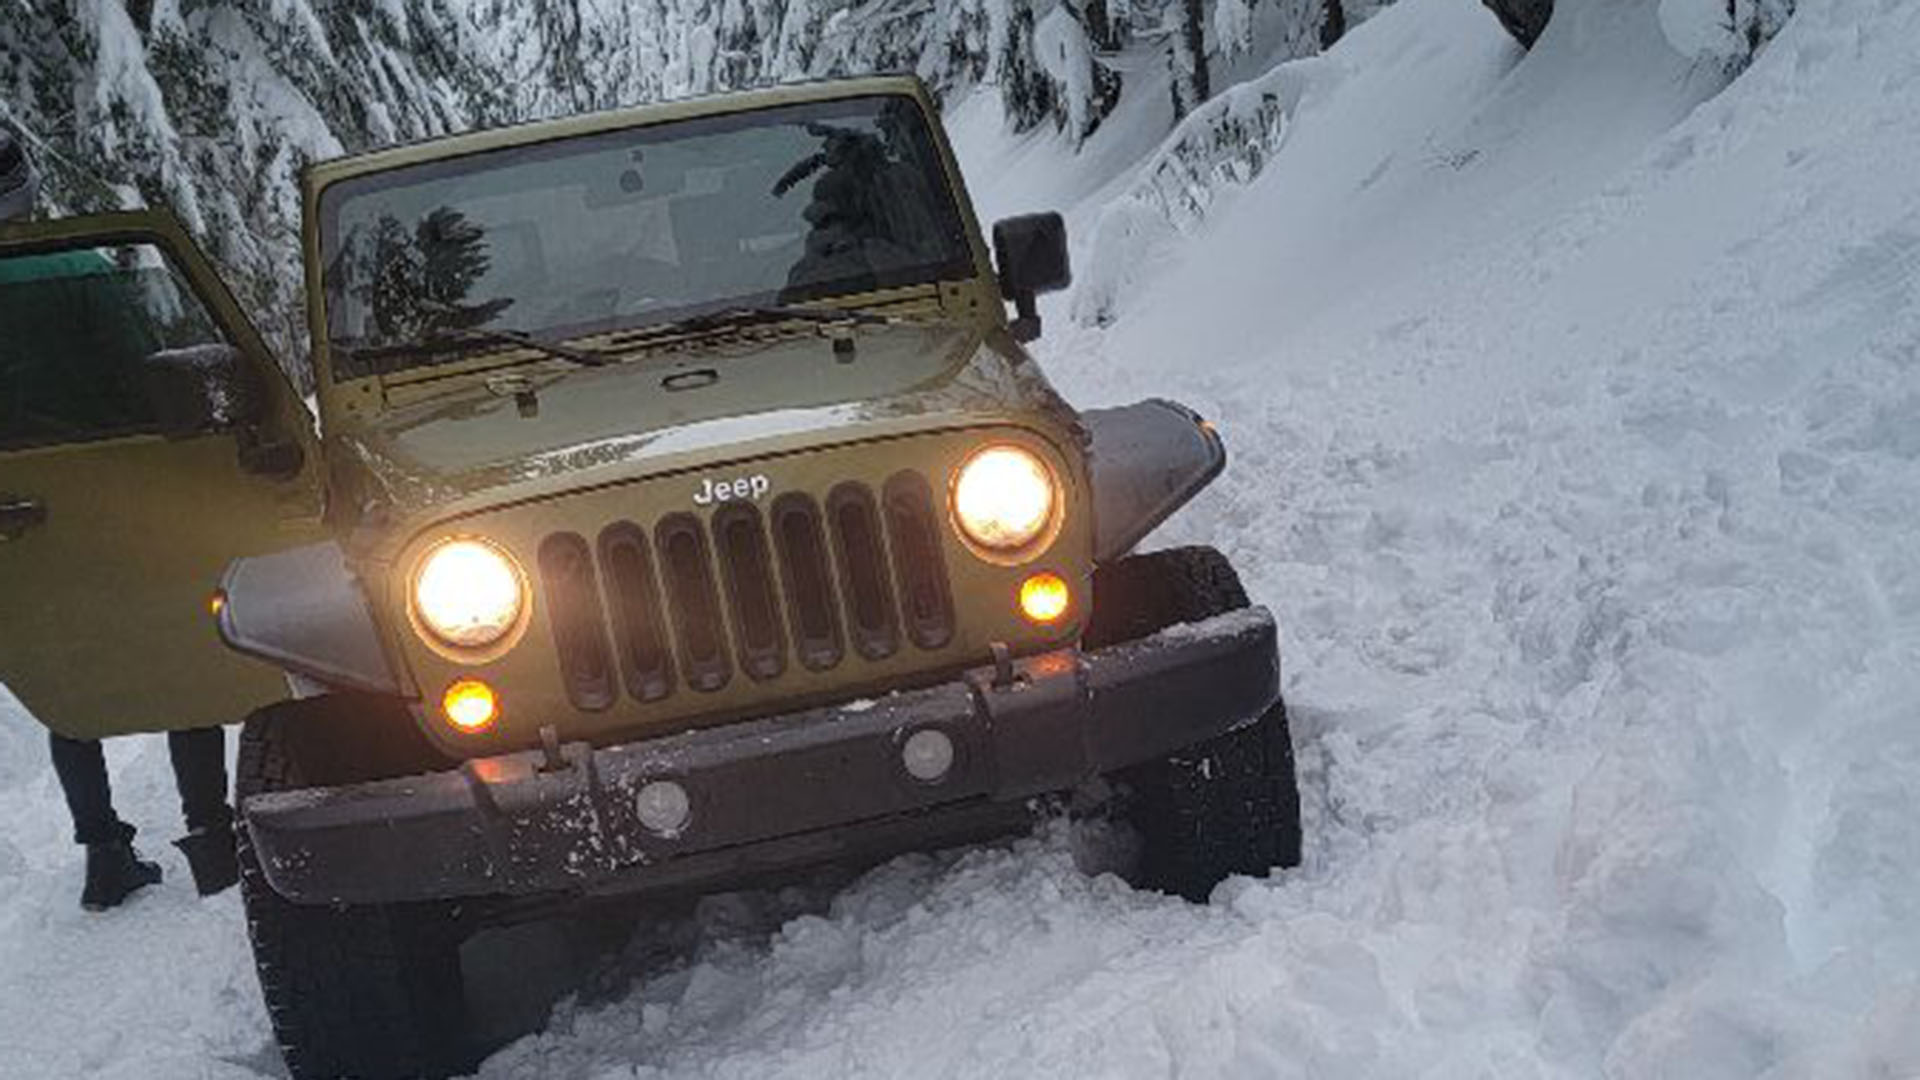 Green Jeep Wrangler stuck in OR